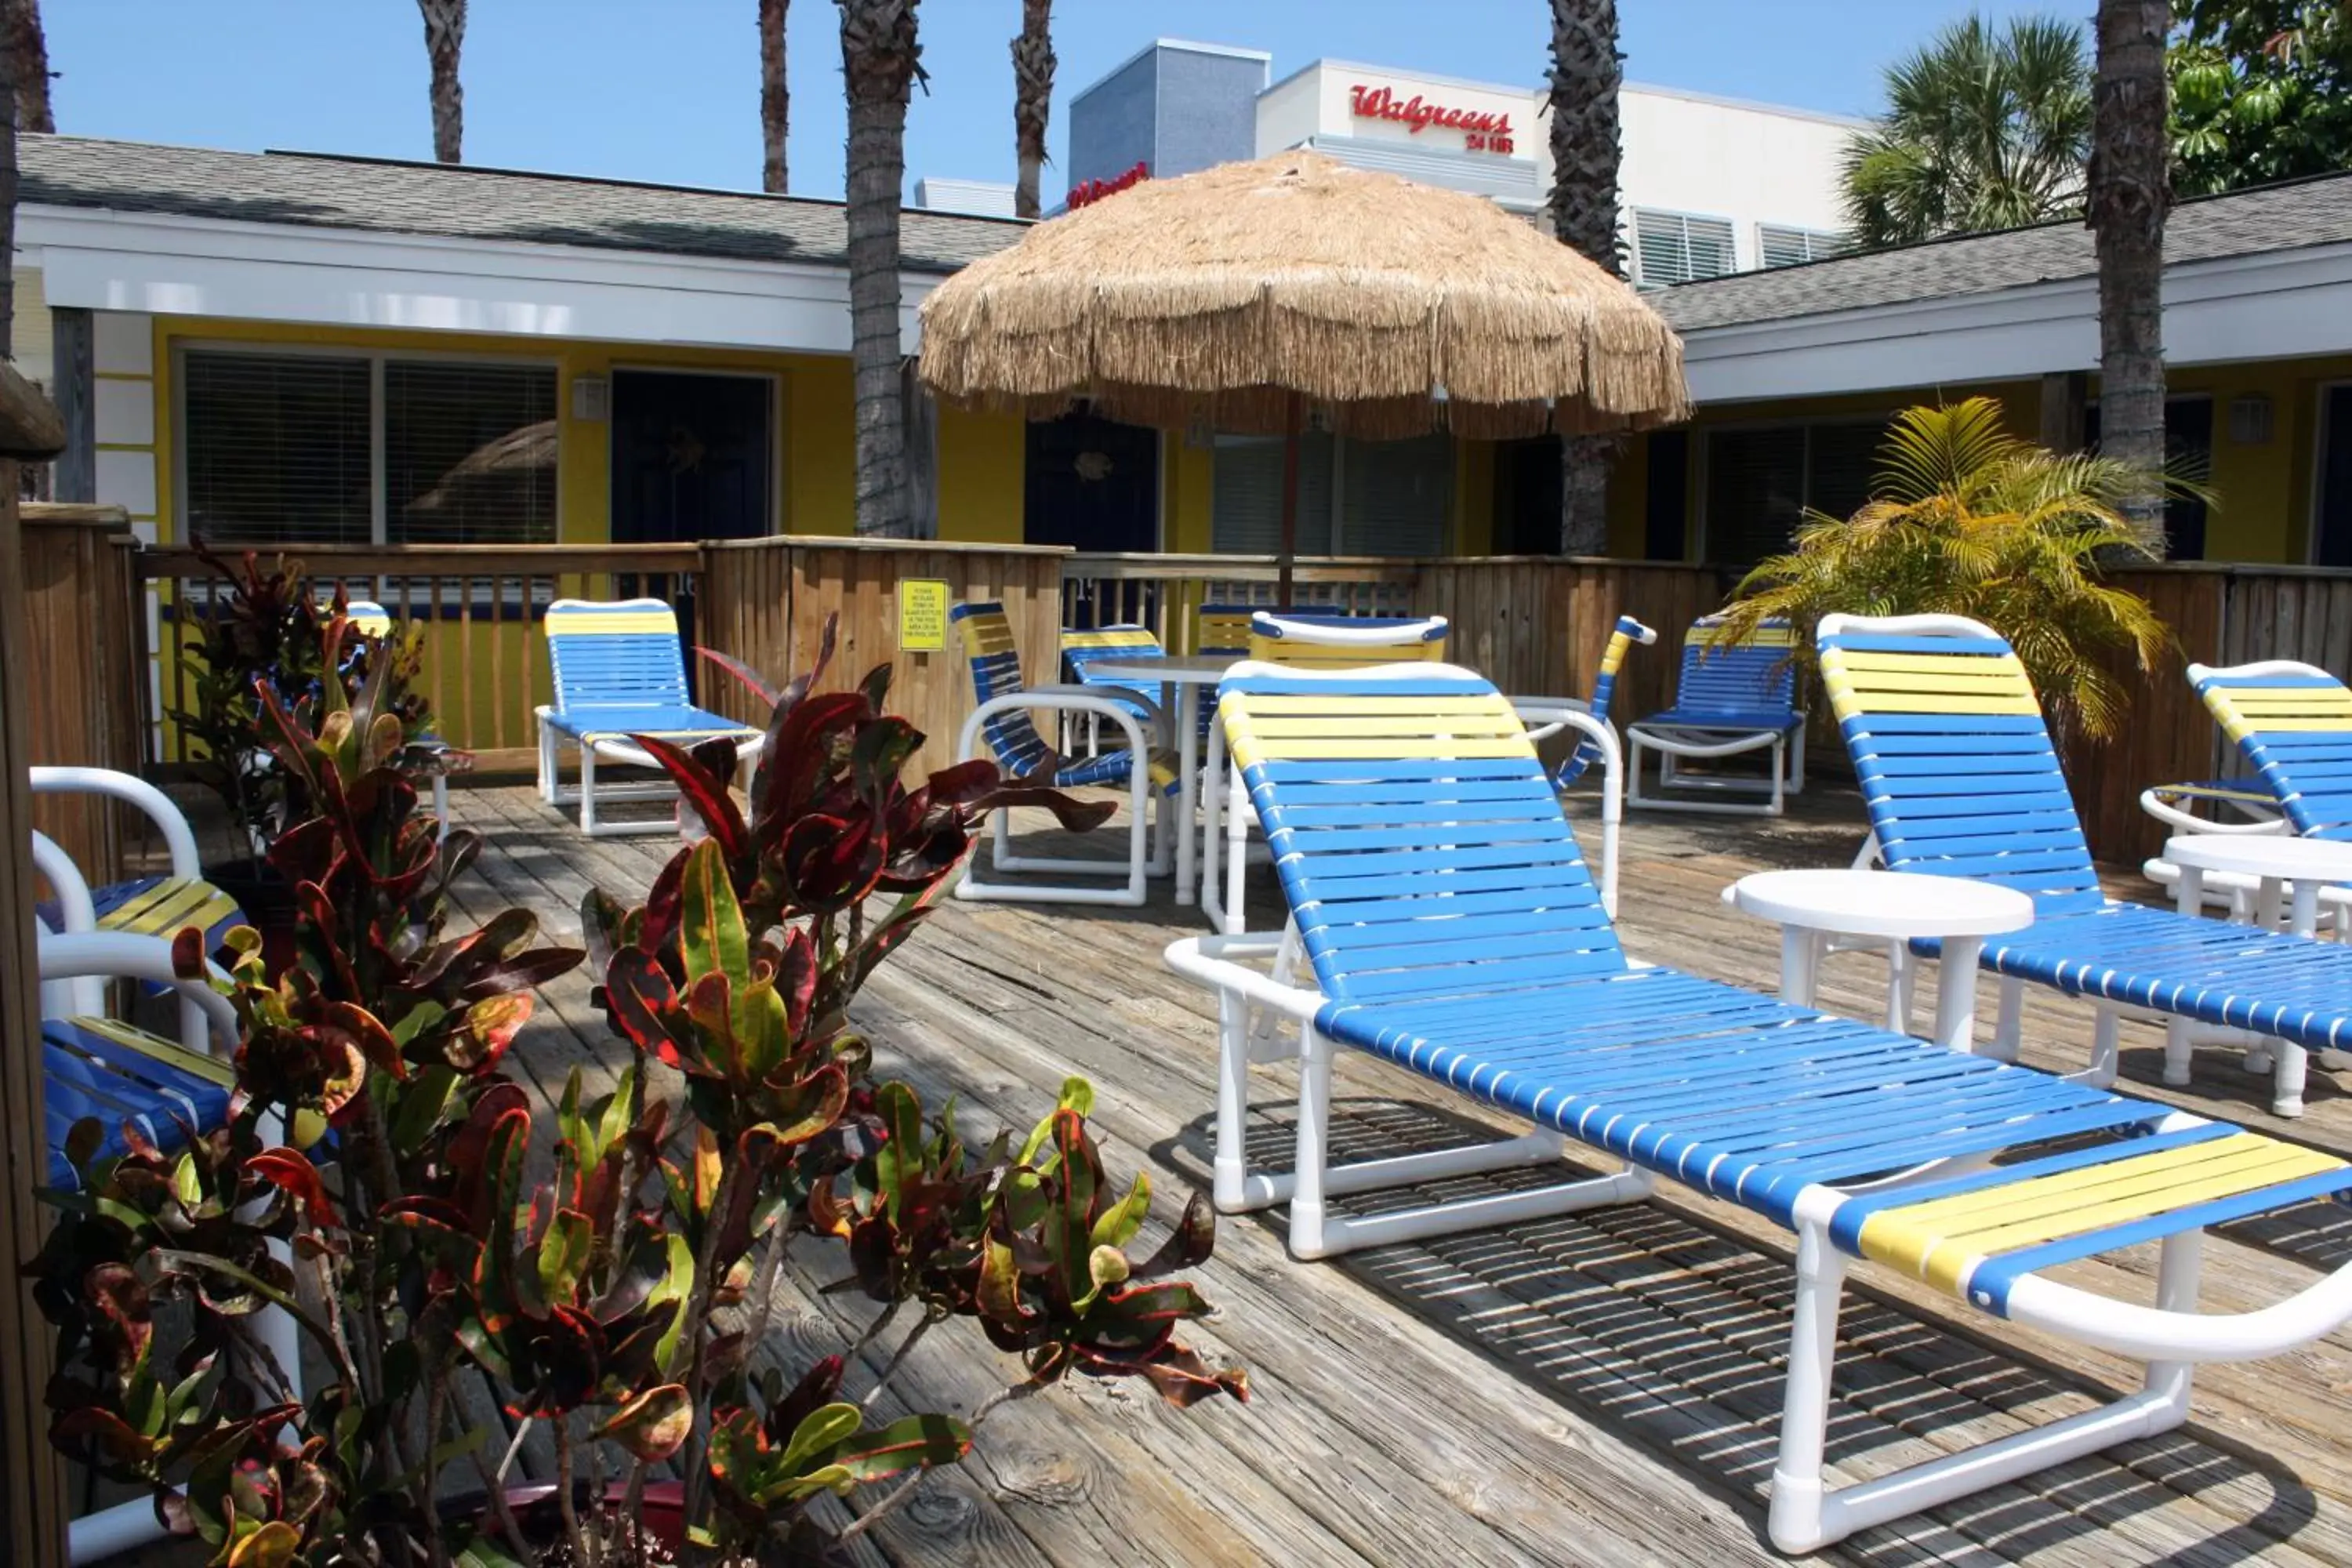 Day, Patio/Outdoor Area in Barefoot Bay Resort Motel